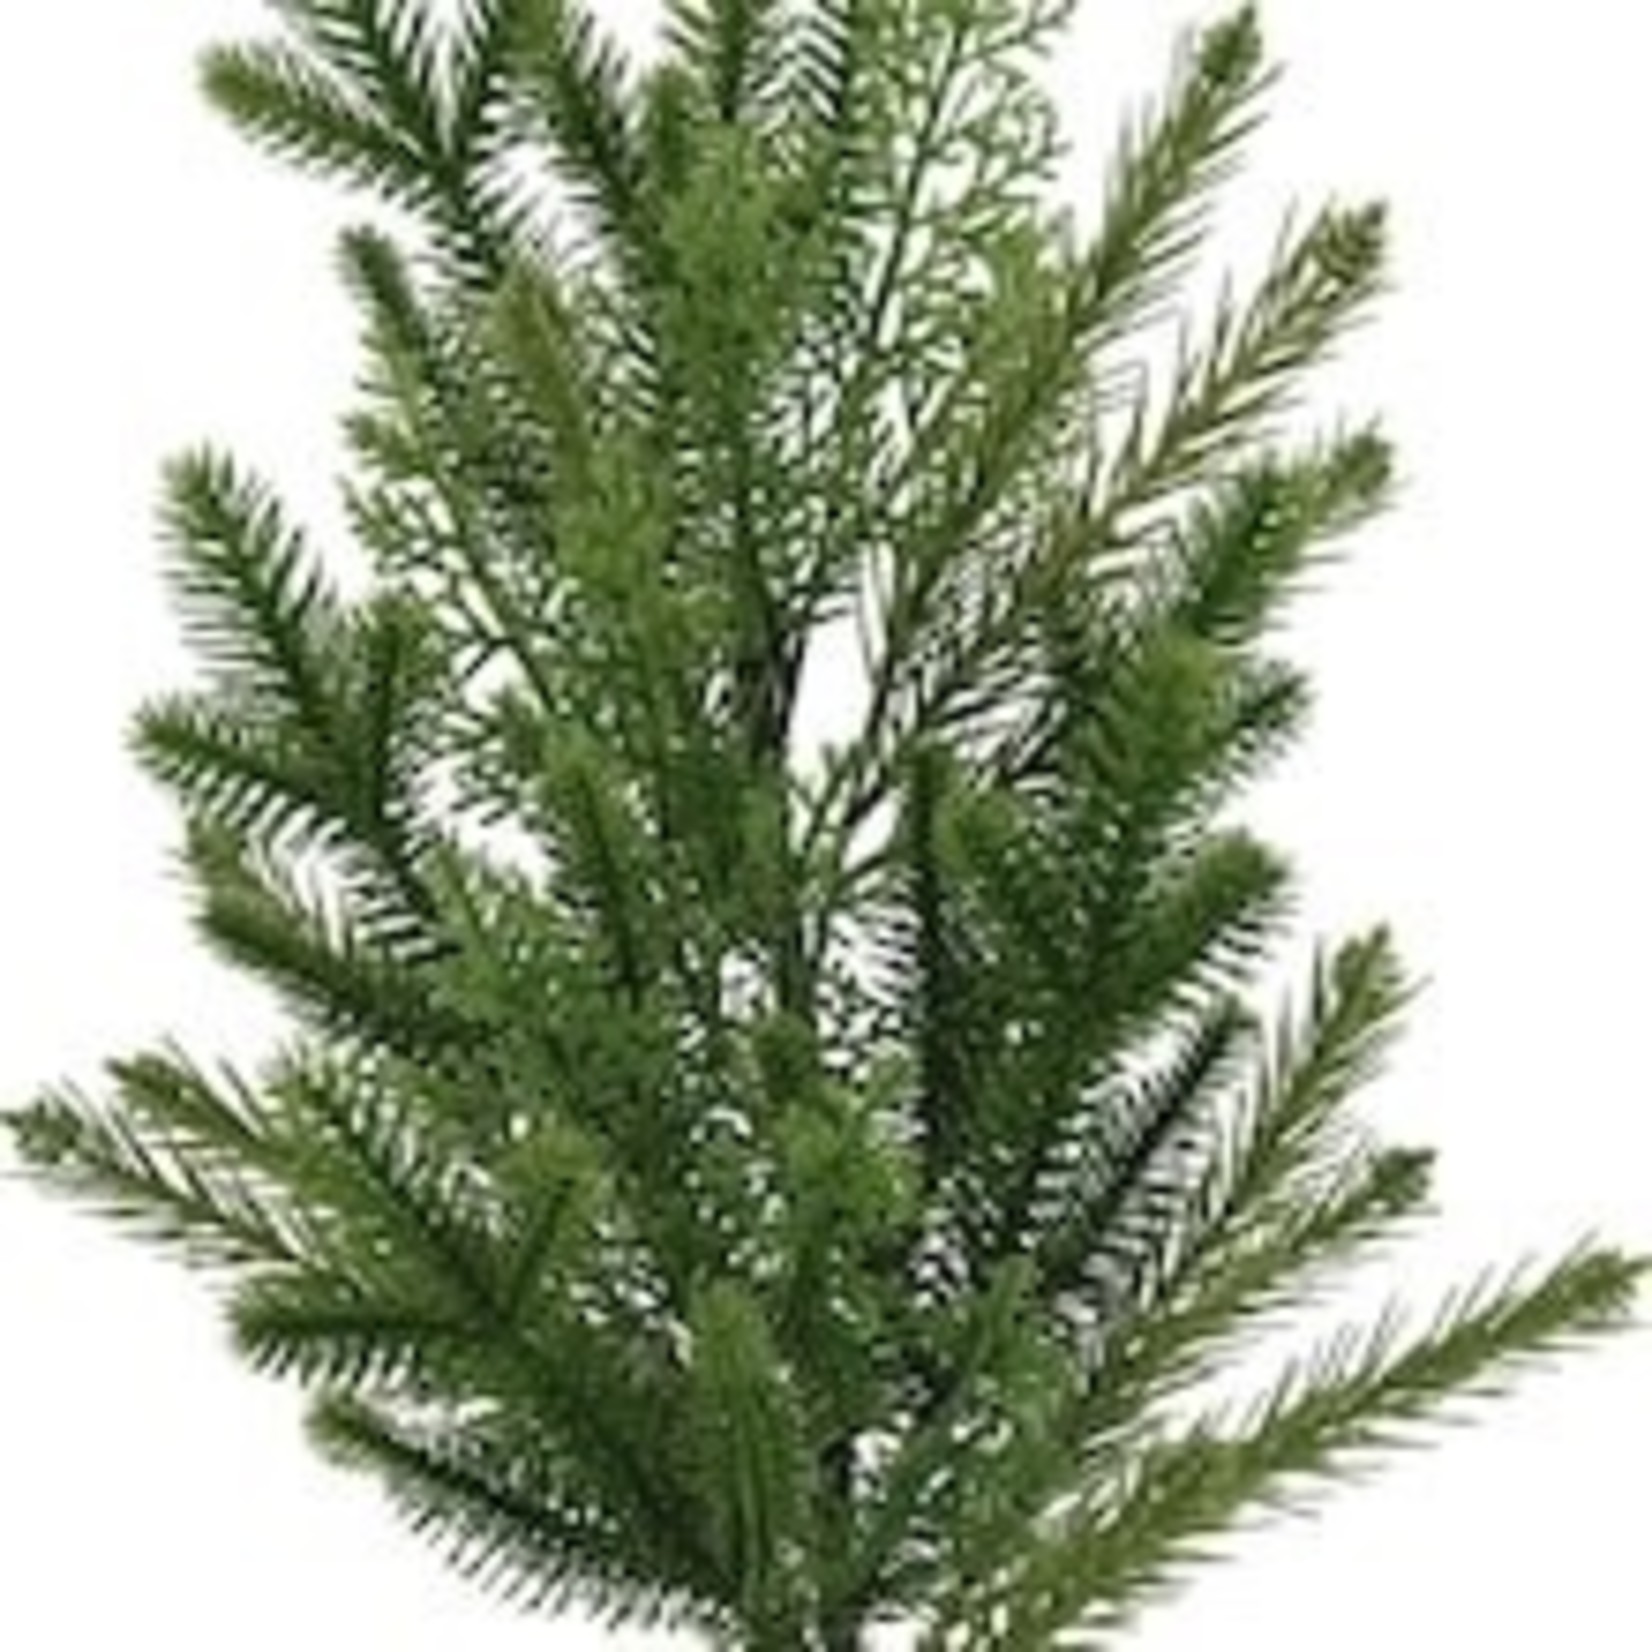 Evergreen Branch Stems- Multiple Pieces